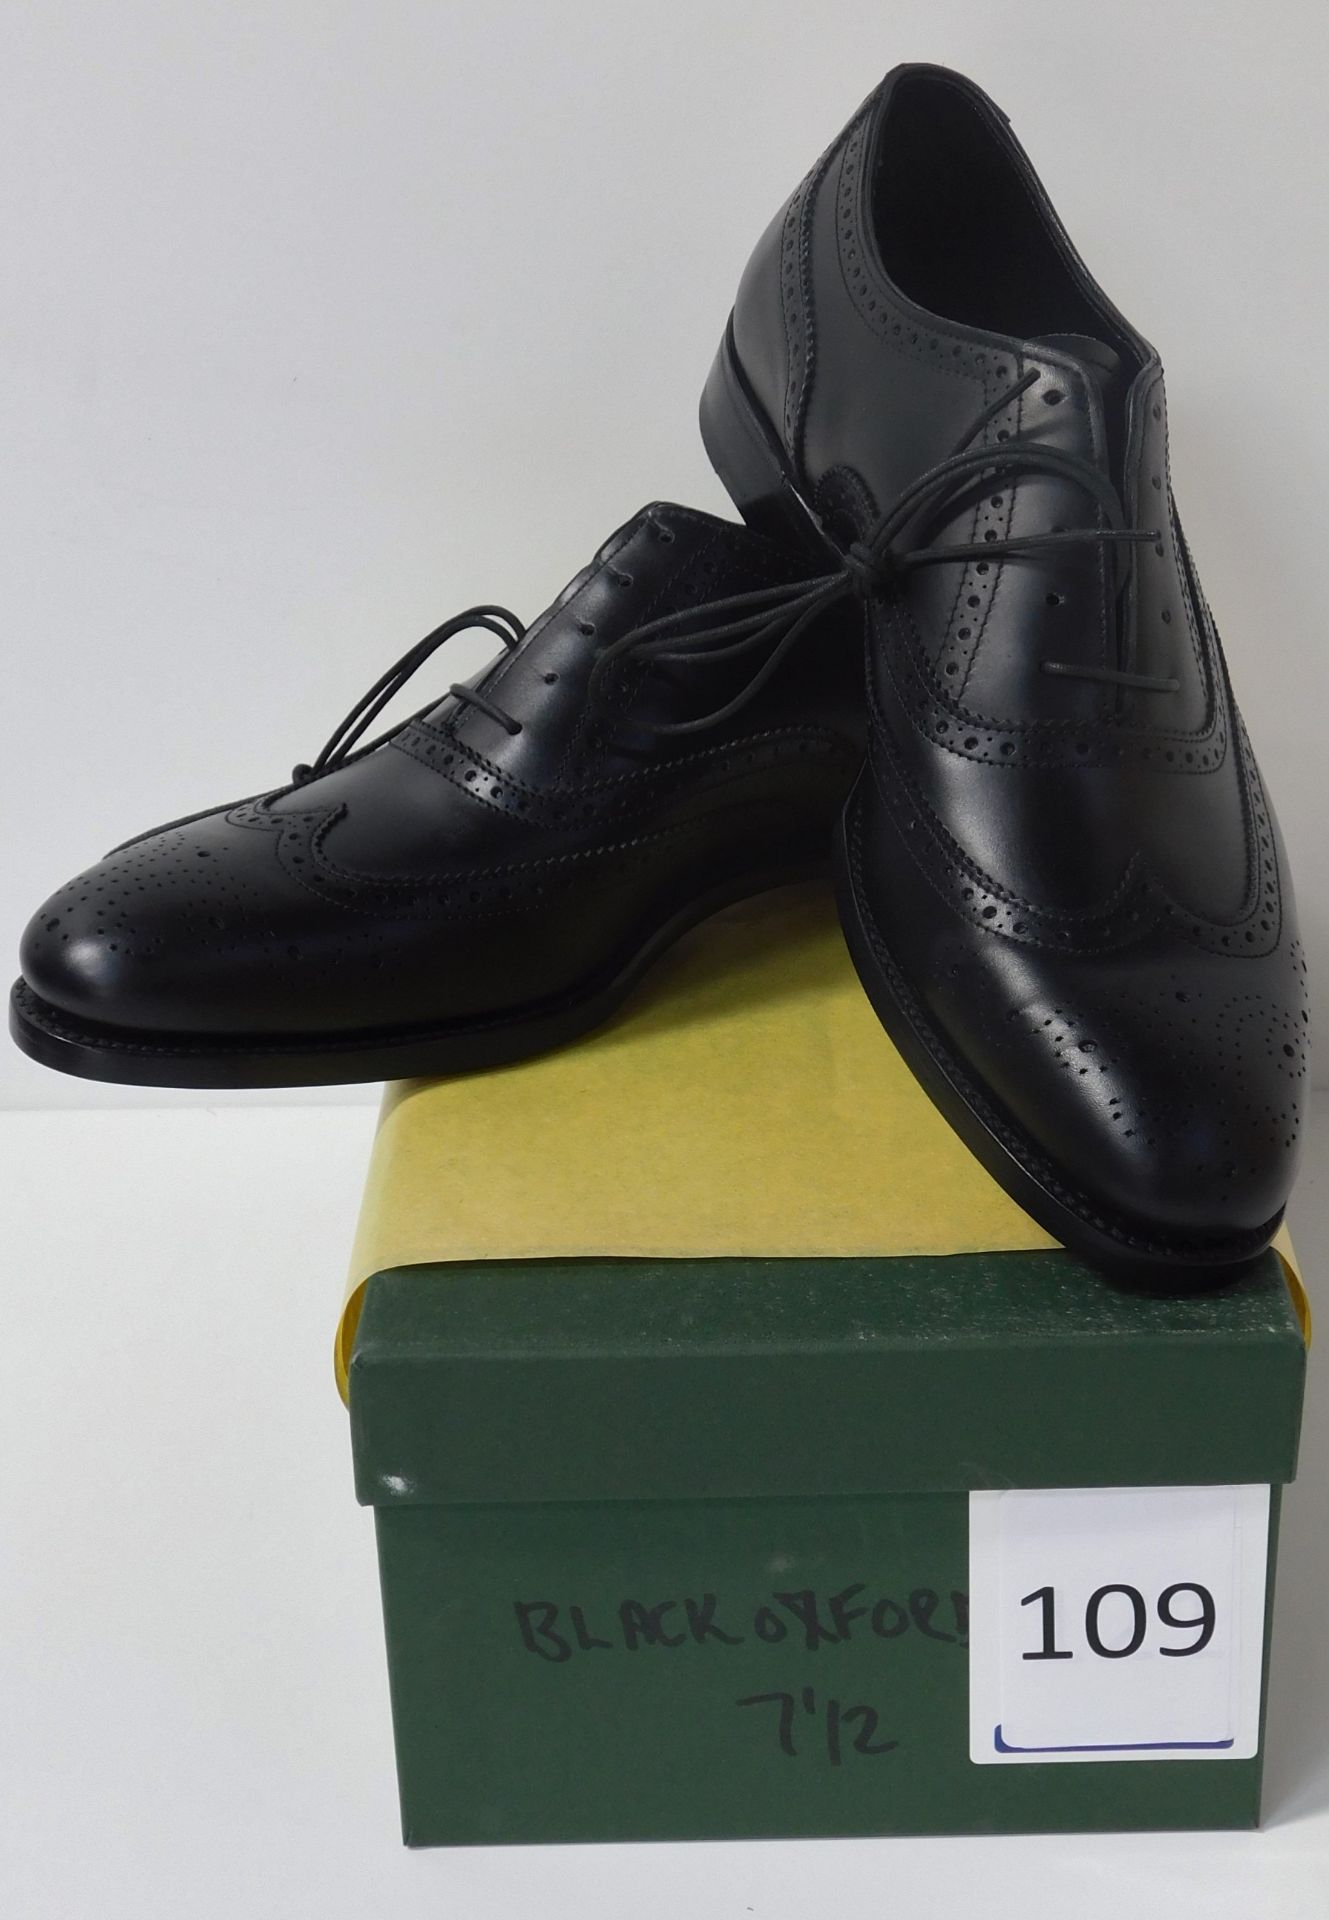 Pair of Alfred Sargent Black Oxford, Size 7.5 (Slight Seconds) (Location: Brentwood - See General